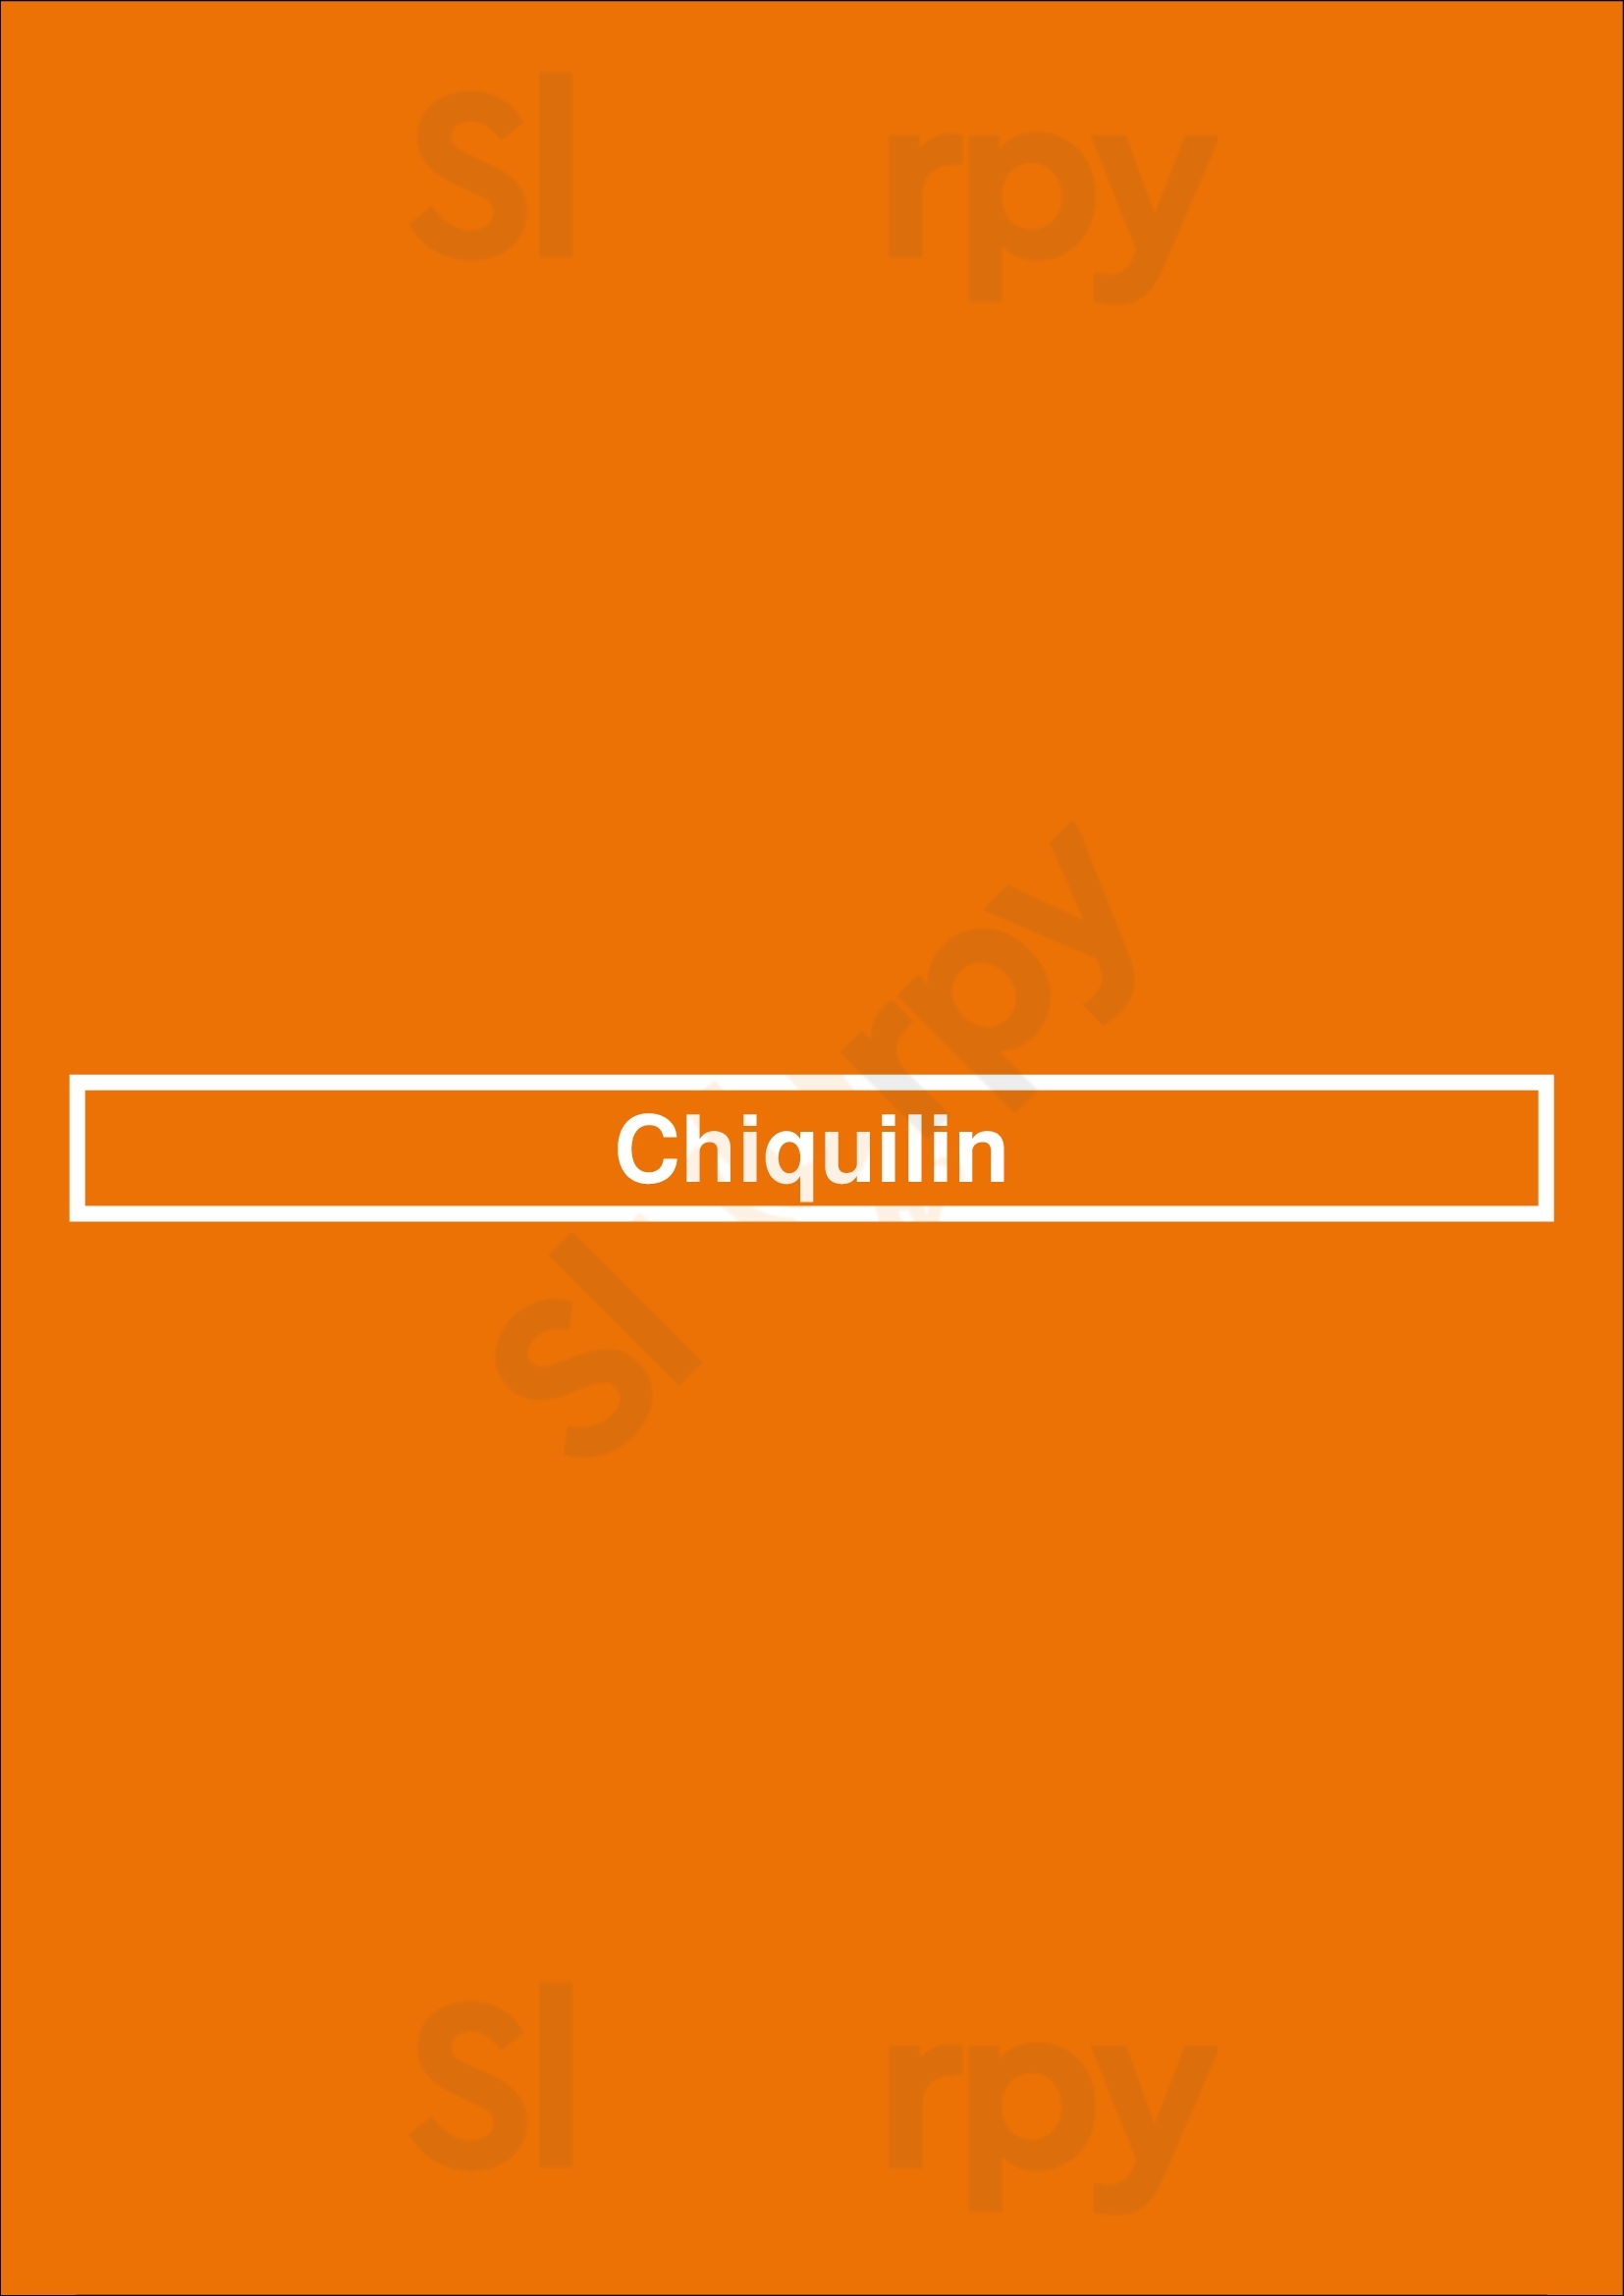 Chiquilin Buenos Aires Menu - 1